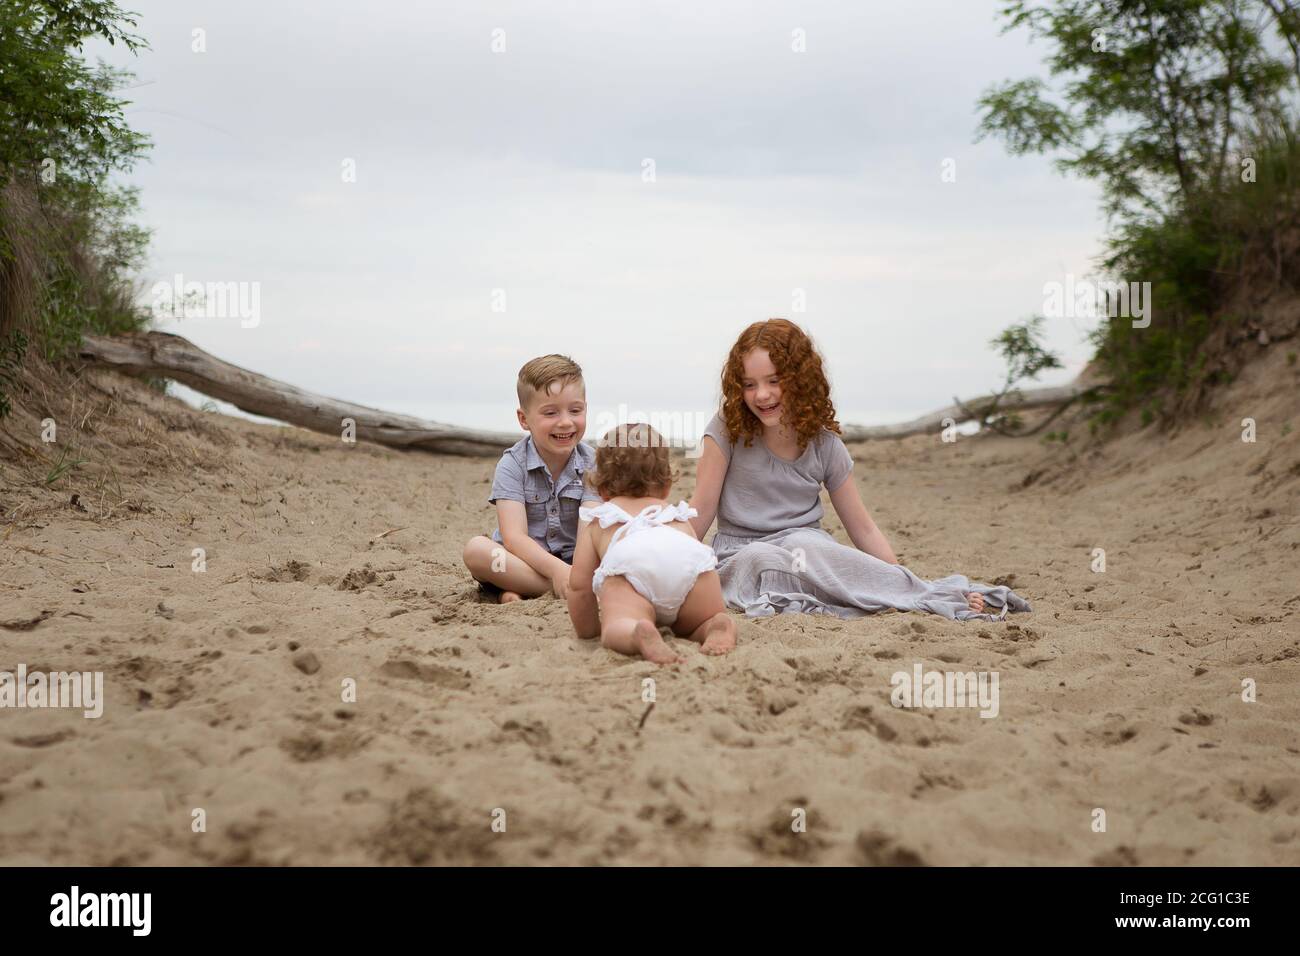 Three Siblings Playing on a Presque Isle Beach at Sunset Stock Photo